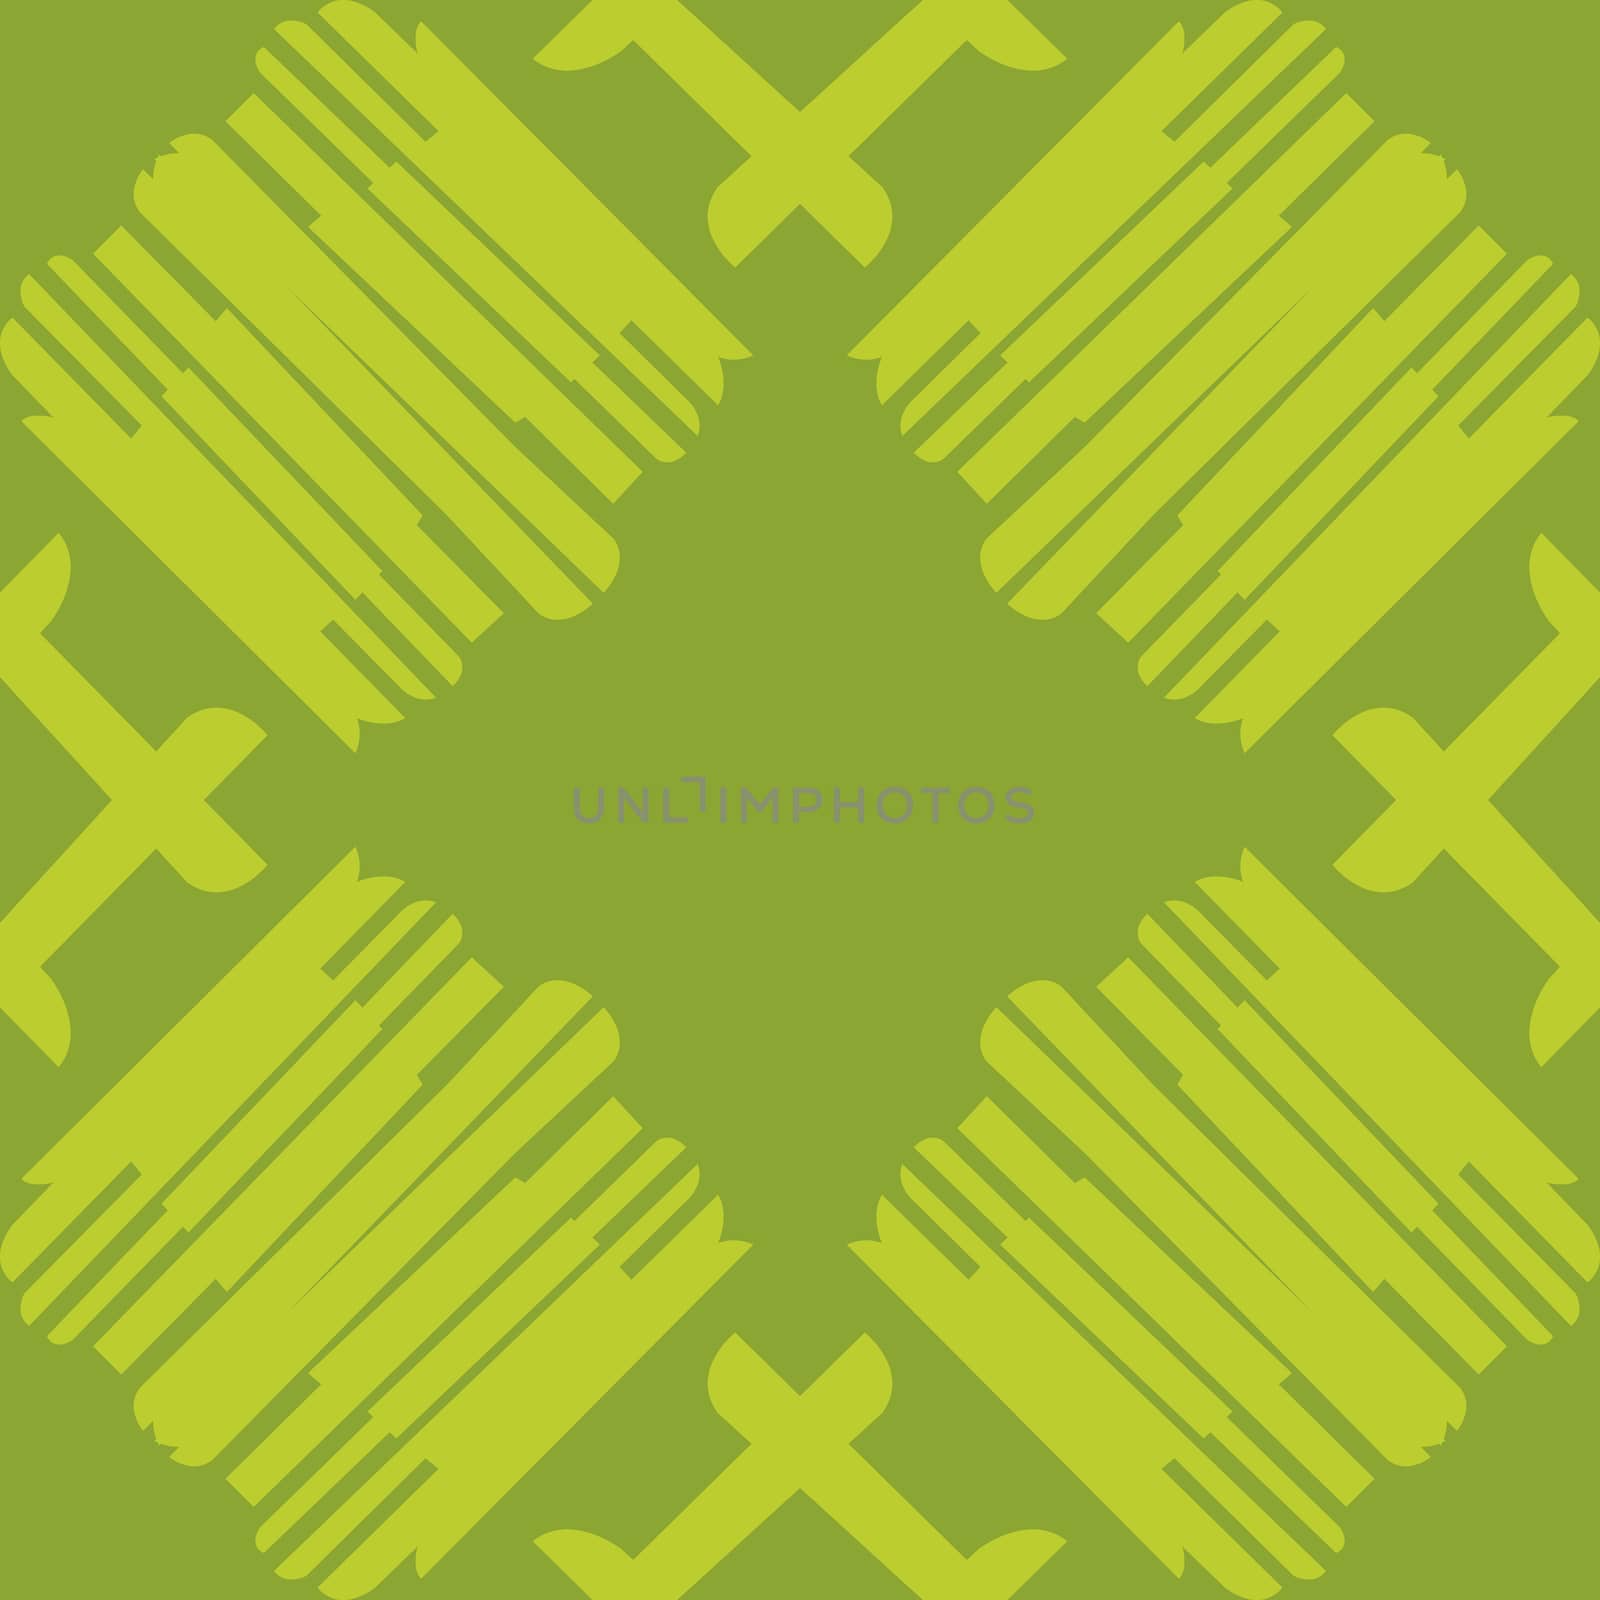 Seamless tiled pattern of lines over green